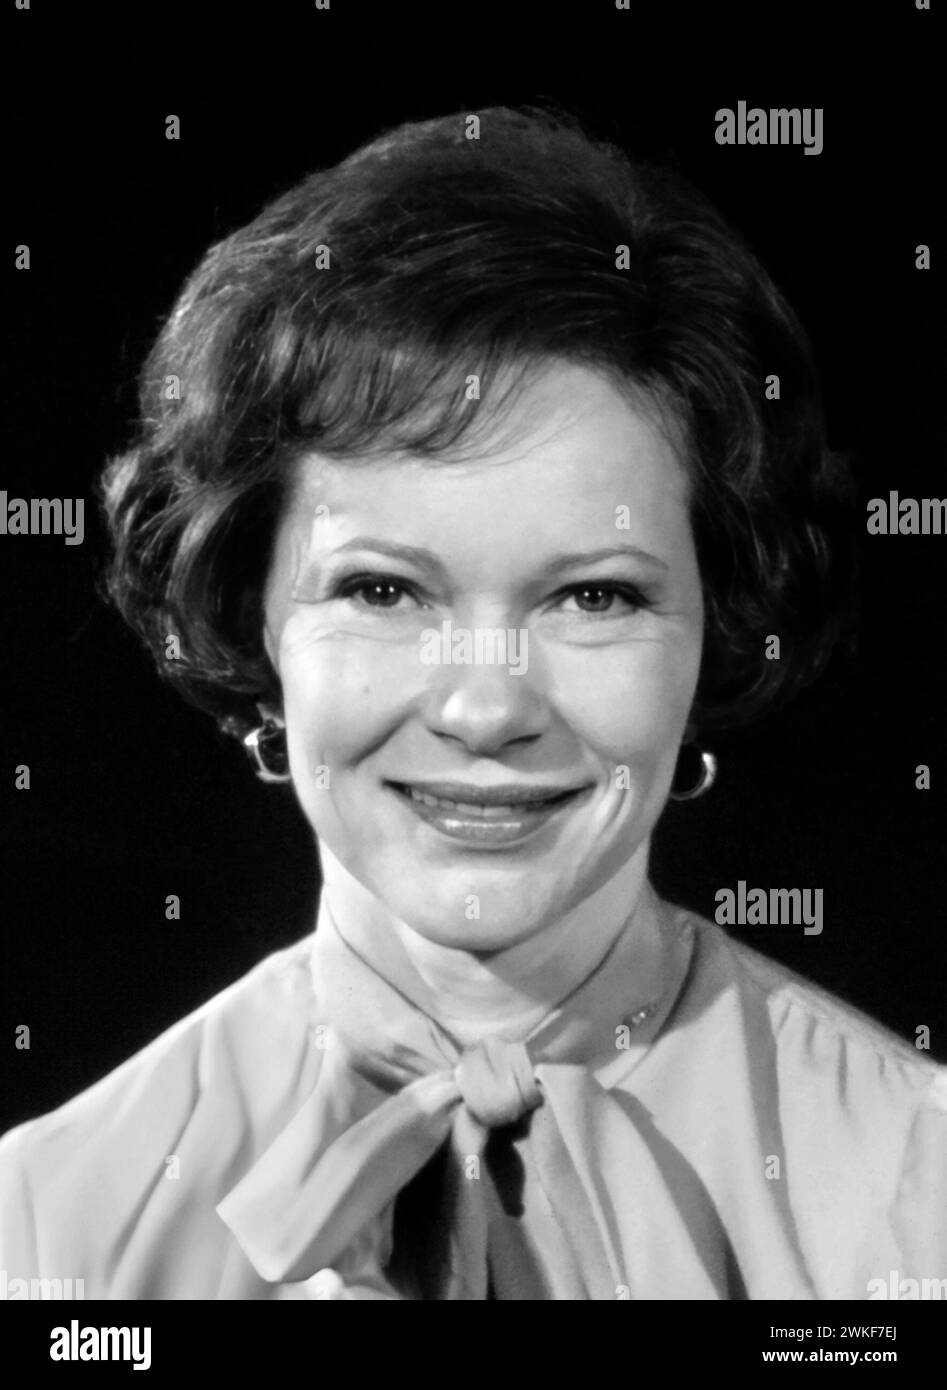 Rosalynn Carter. Portrait of the First Lady of the United States as the wife of President Jimmy Carter, Eleanor Rosalynn Carter (1927- 2023). Photo by Bernard Gotfryd, between 1977 and 1981 Stock Photo